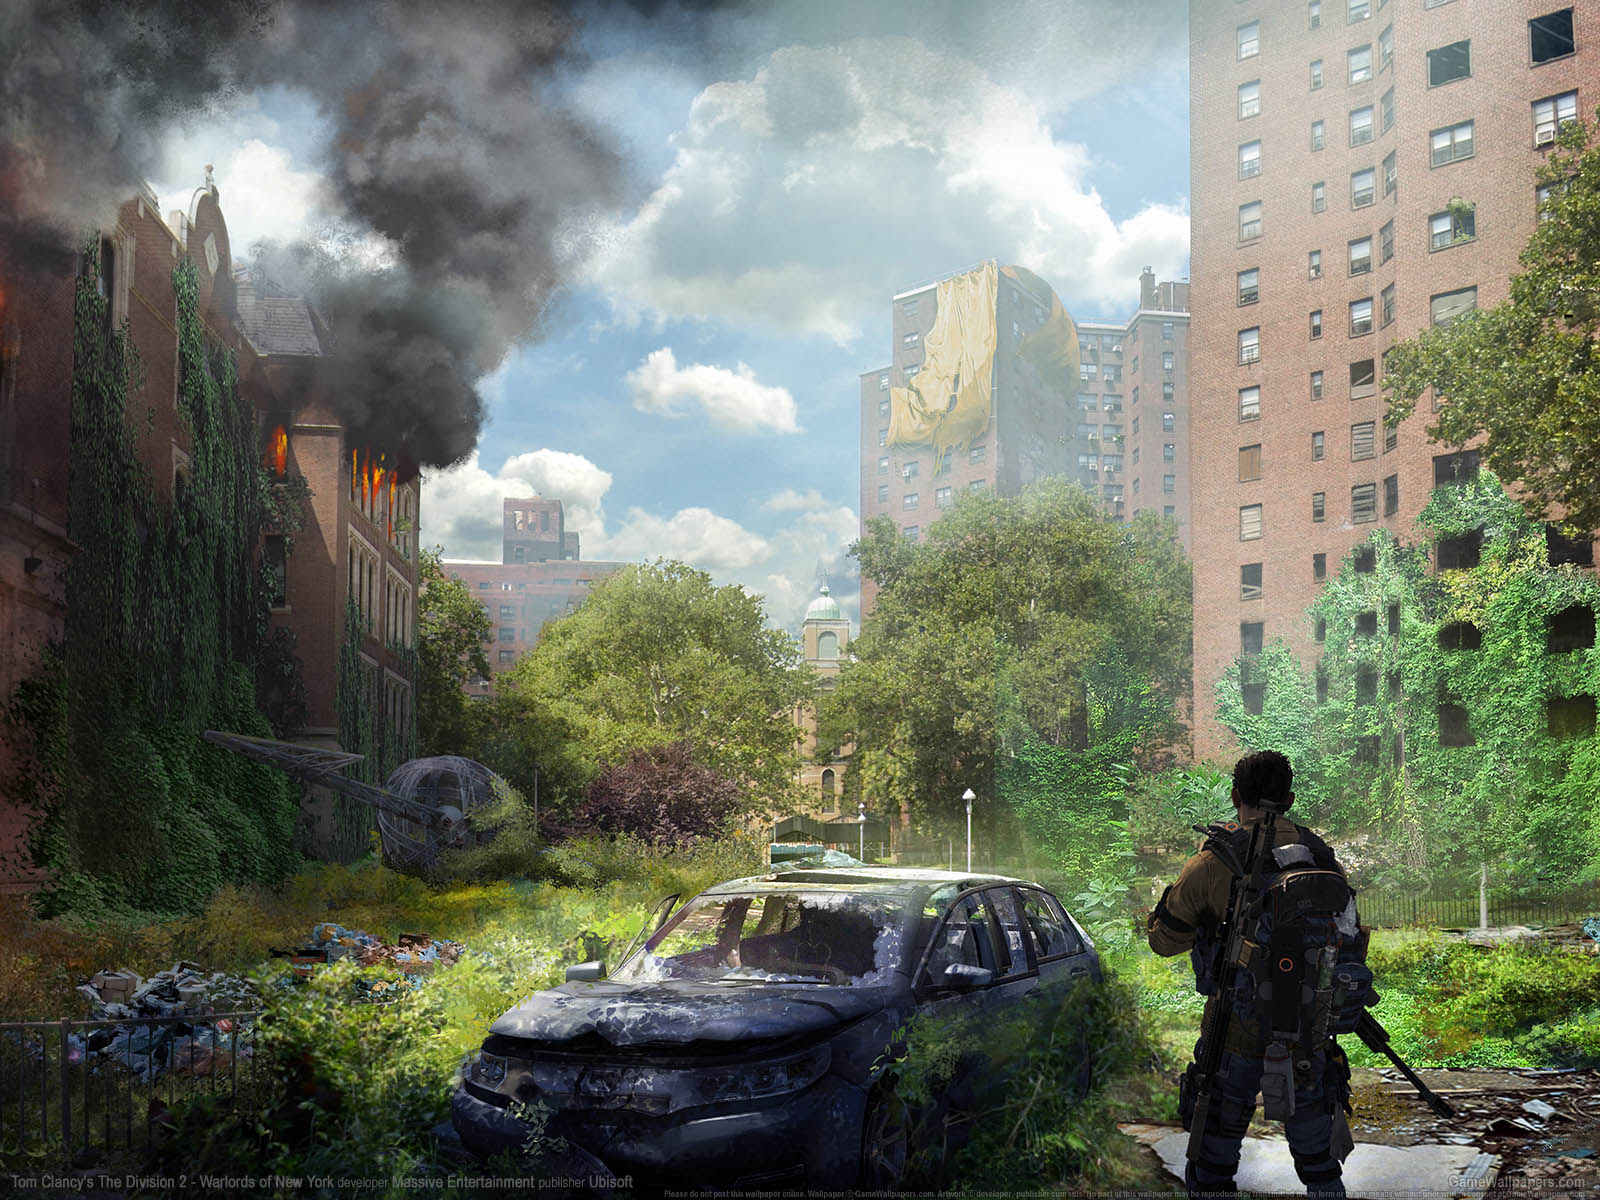 Tom Clancy%5C%27s The Division 2 - Warlords of New York fond d'cran 03 1600x1200